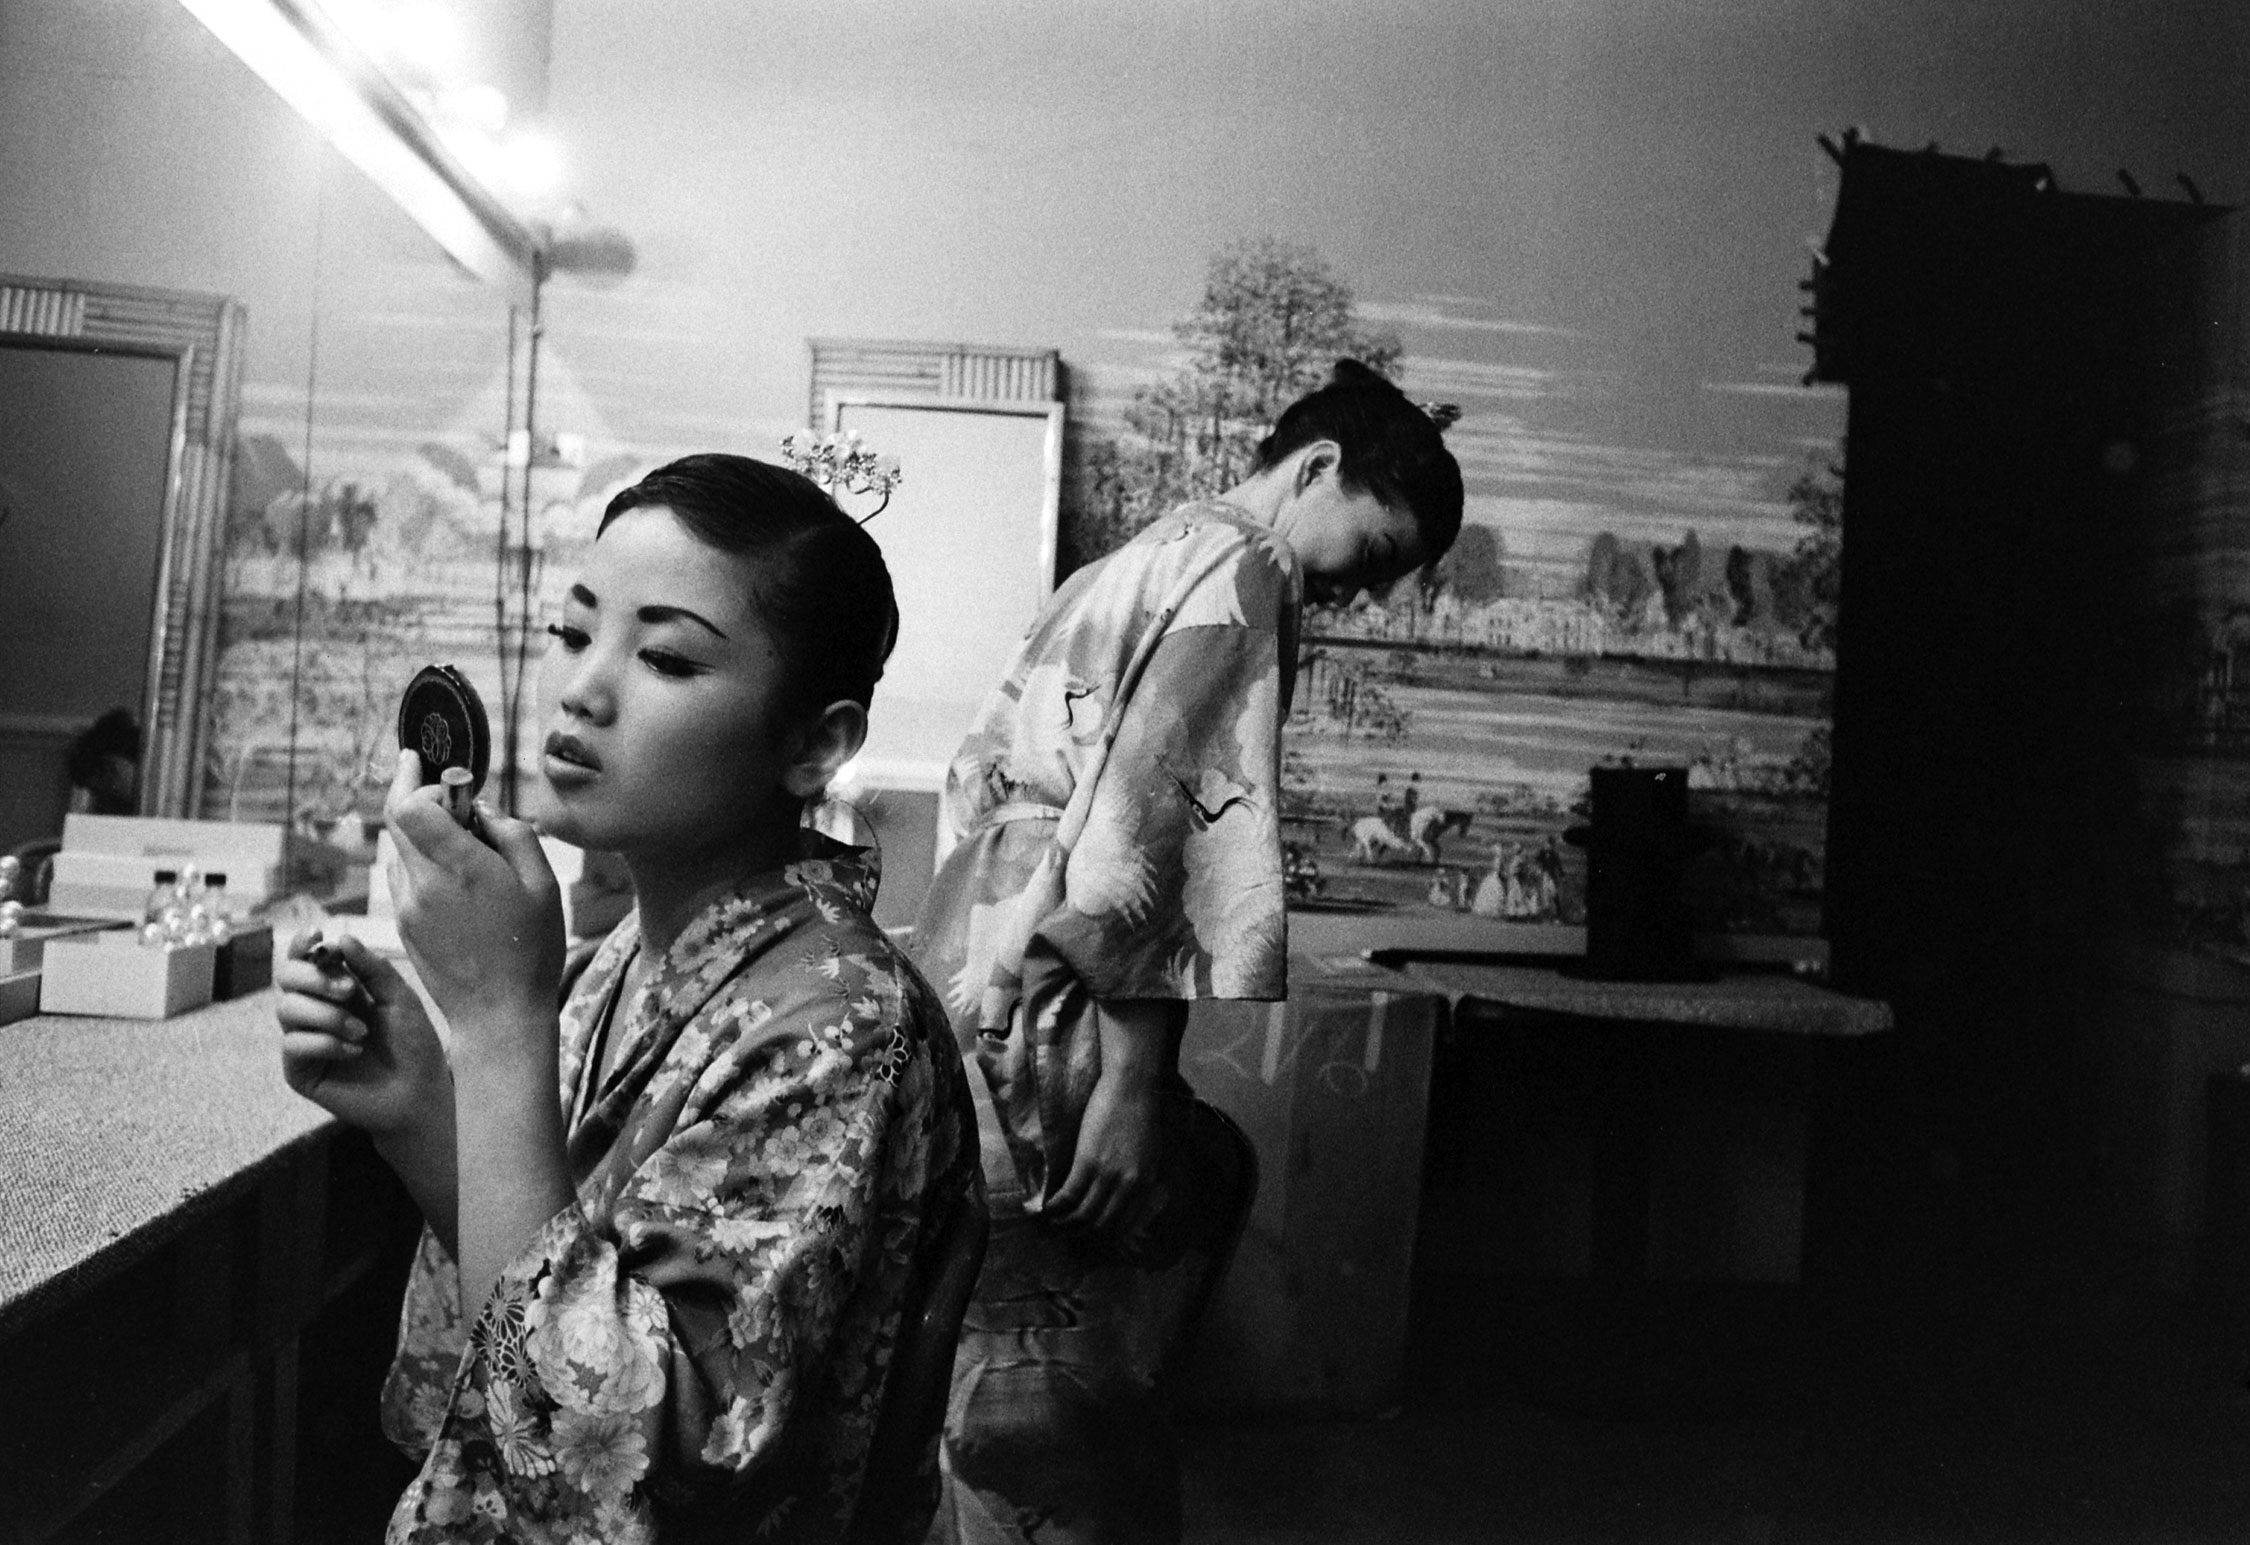 The Kim Sisters backstage, Chicago, 1960.